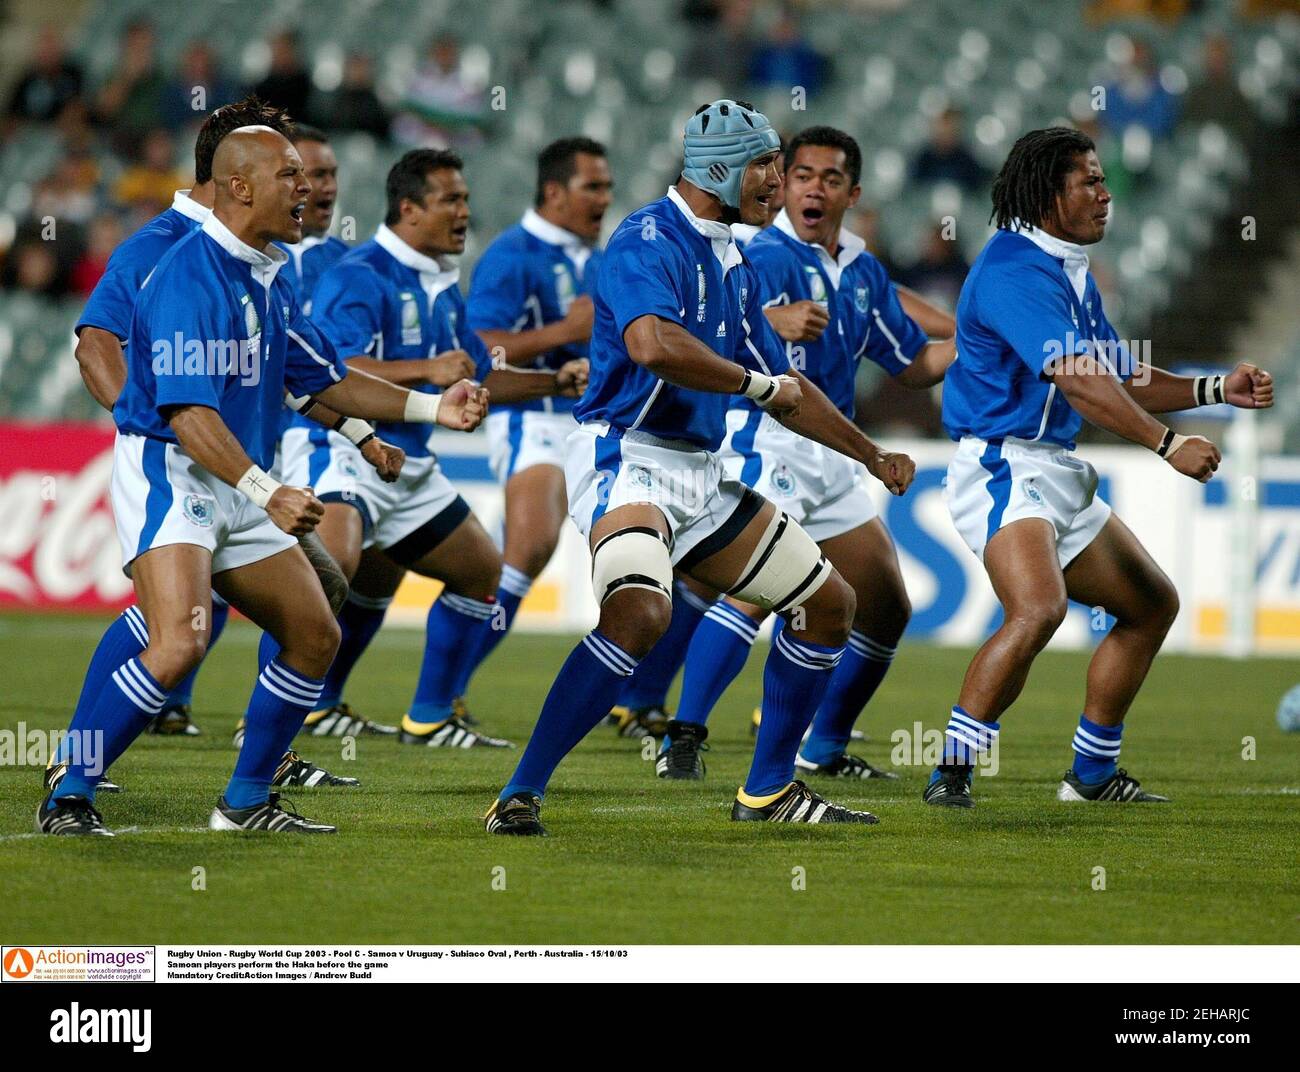 Rugby Union - Rugby World Cup 2003 - Pool C - Samoa v Uruguay - Subiaco Oval , Perth - Australia - 15/10/03  Samoan players perform the Haka before the game  Mandatory Credit:Action Images / Andrew Budd Stock Photo